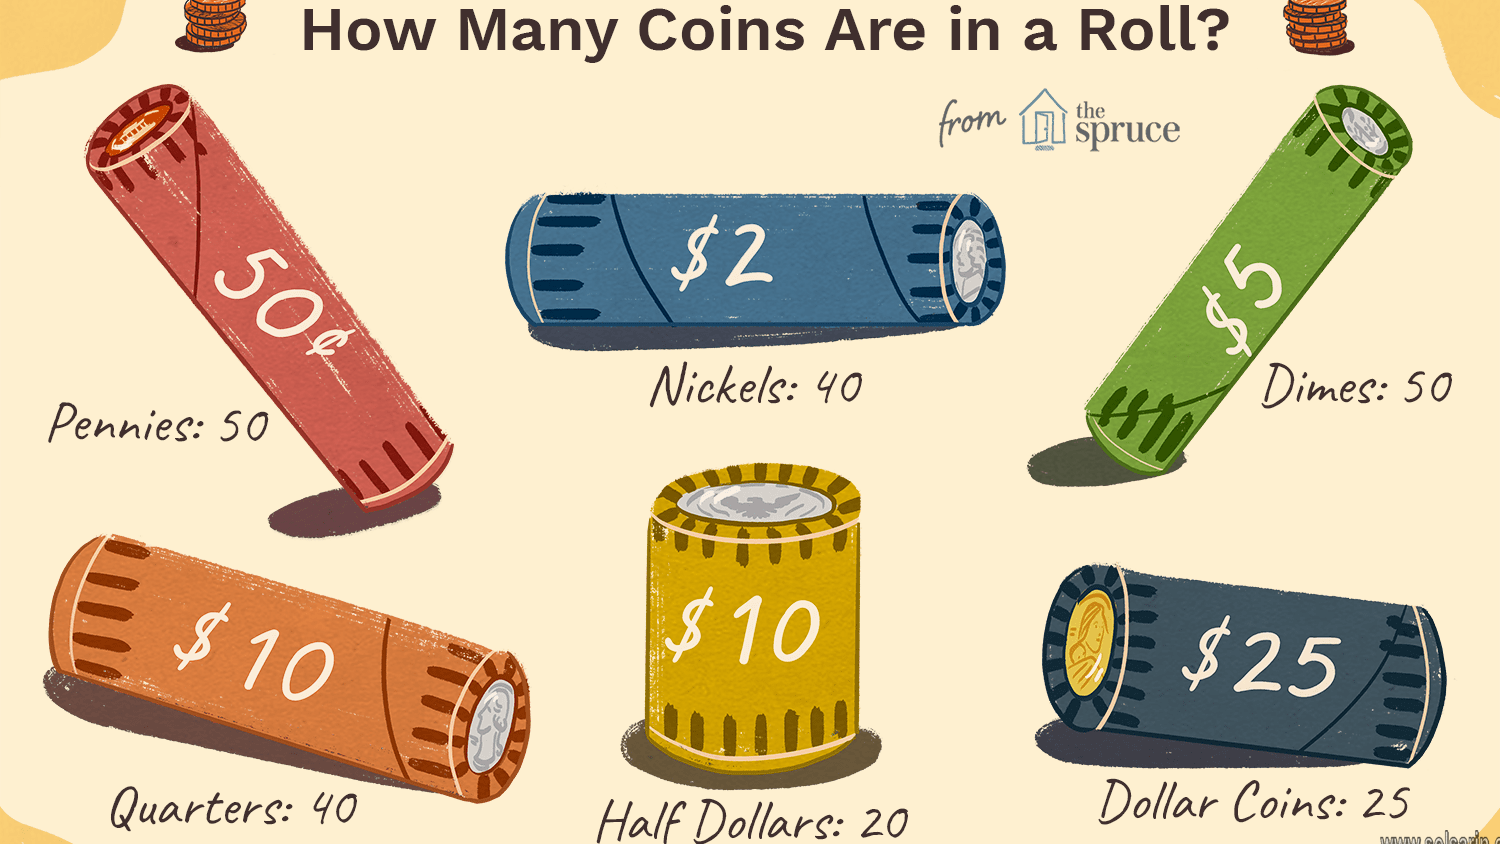 how much does a roll of quarters weigh